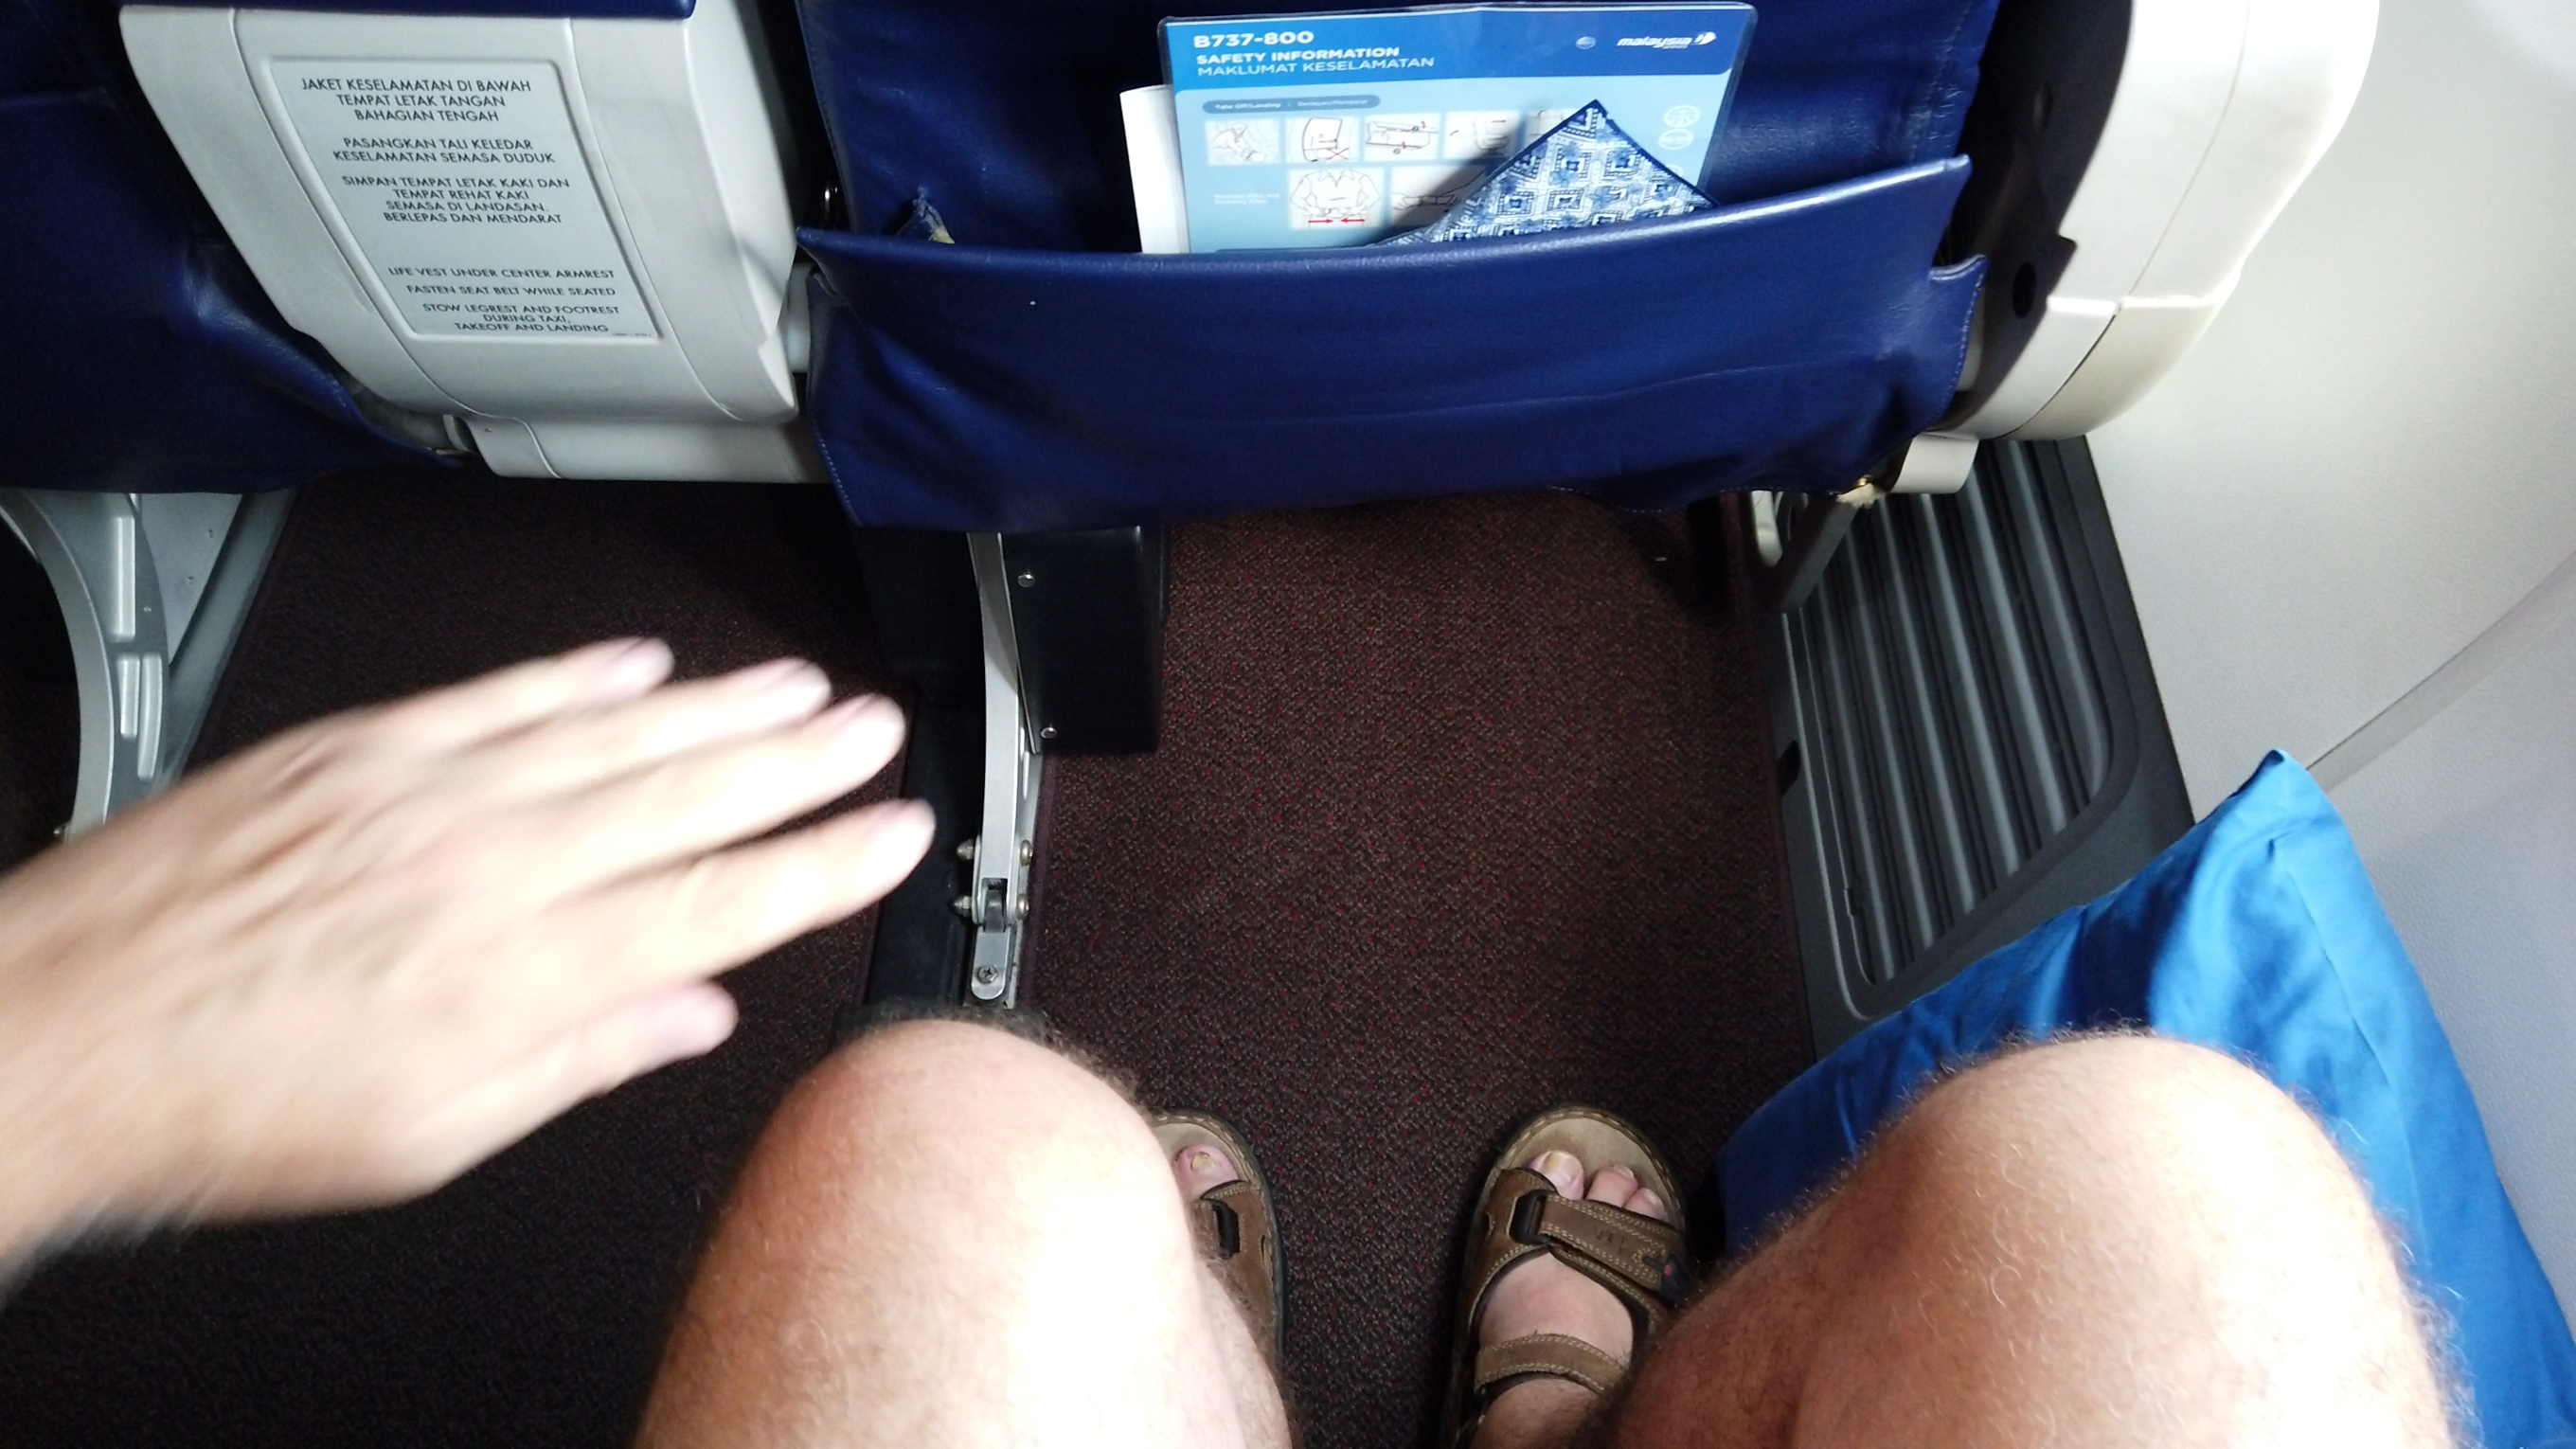 Plenty of leg room in Business Class on Malaysia Airlines B747-800